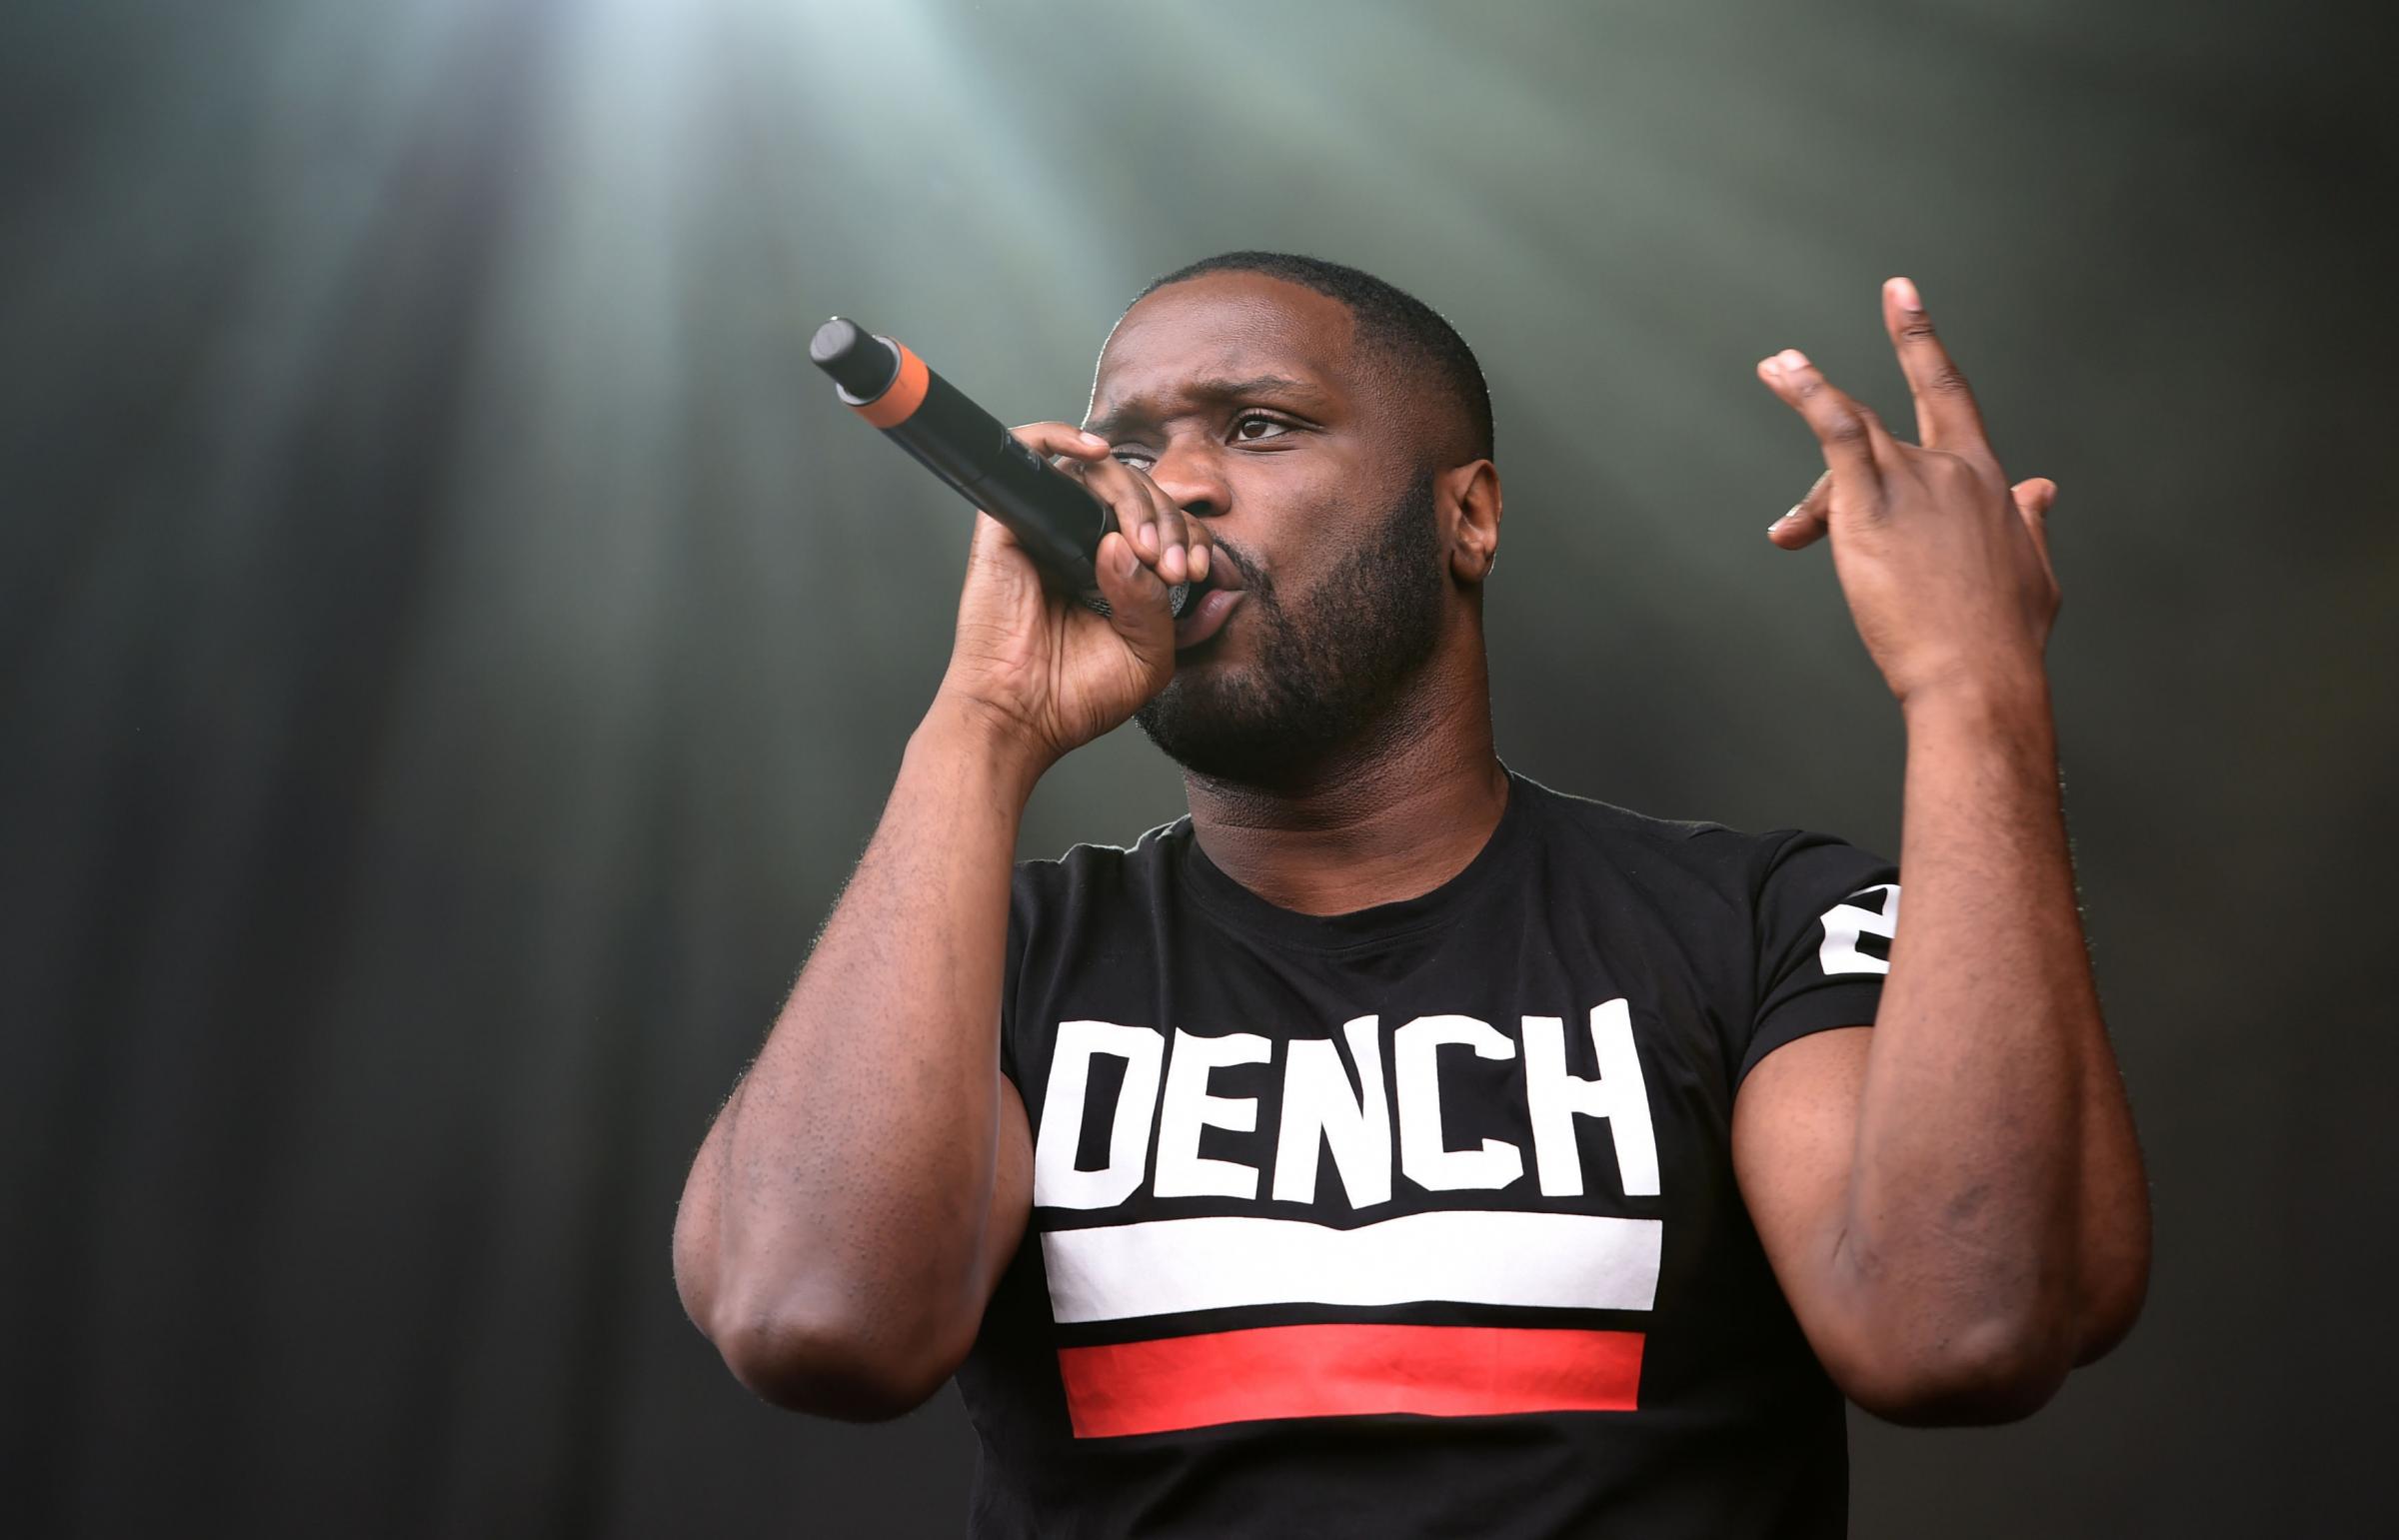 Rapper - Lethal Bizzle got on stage at the nightclub in Warrior Square close to 11 years ago